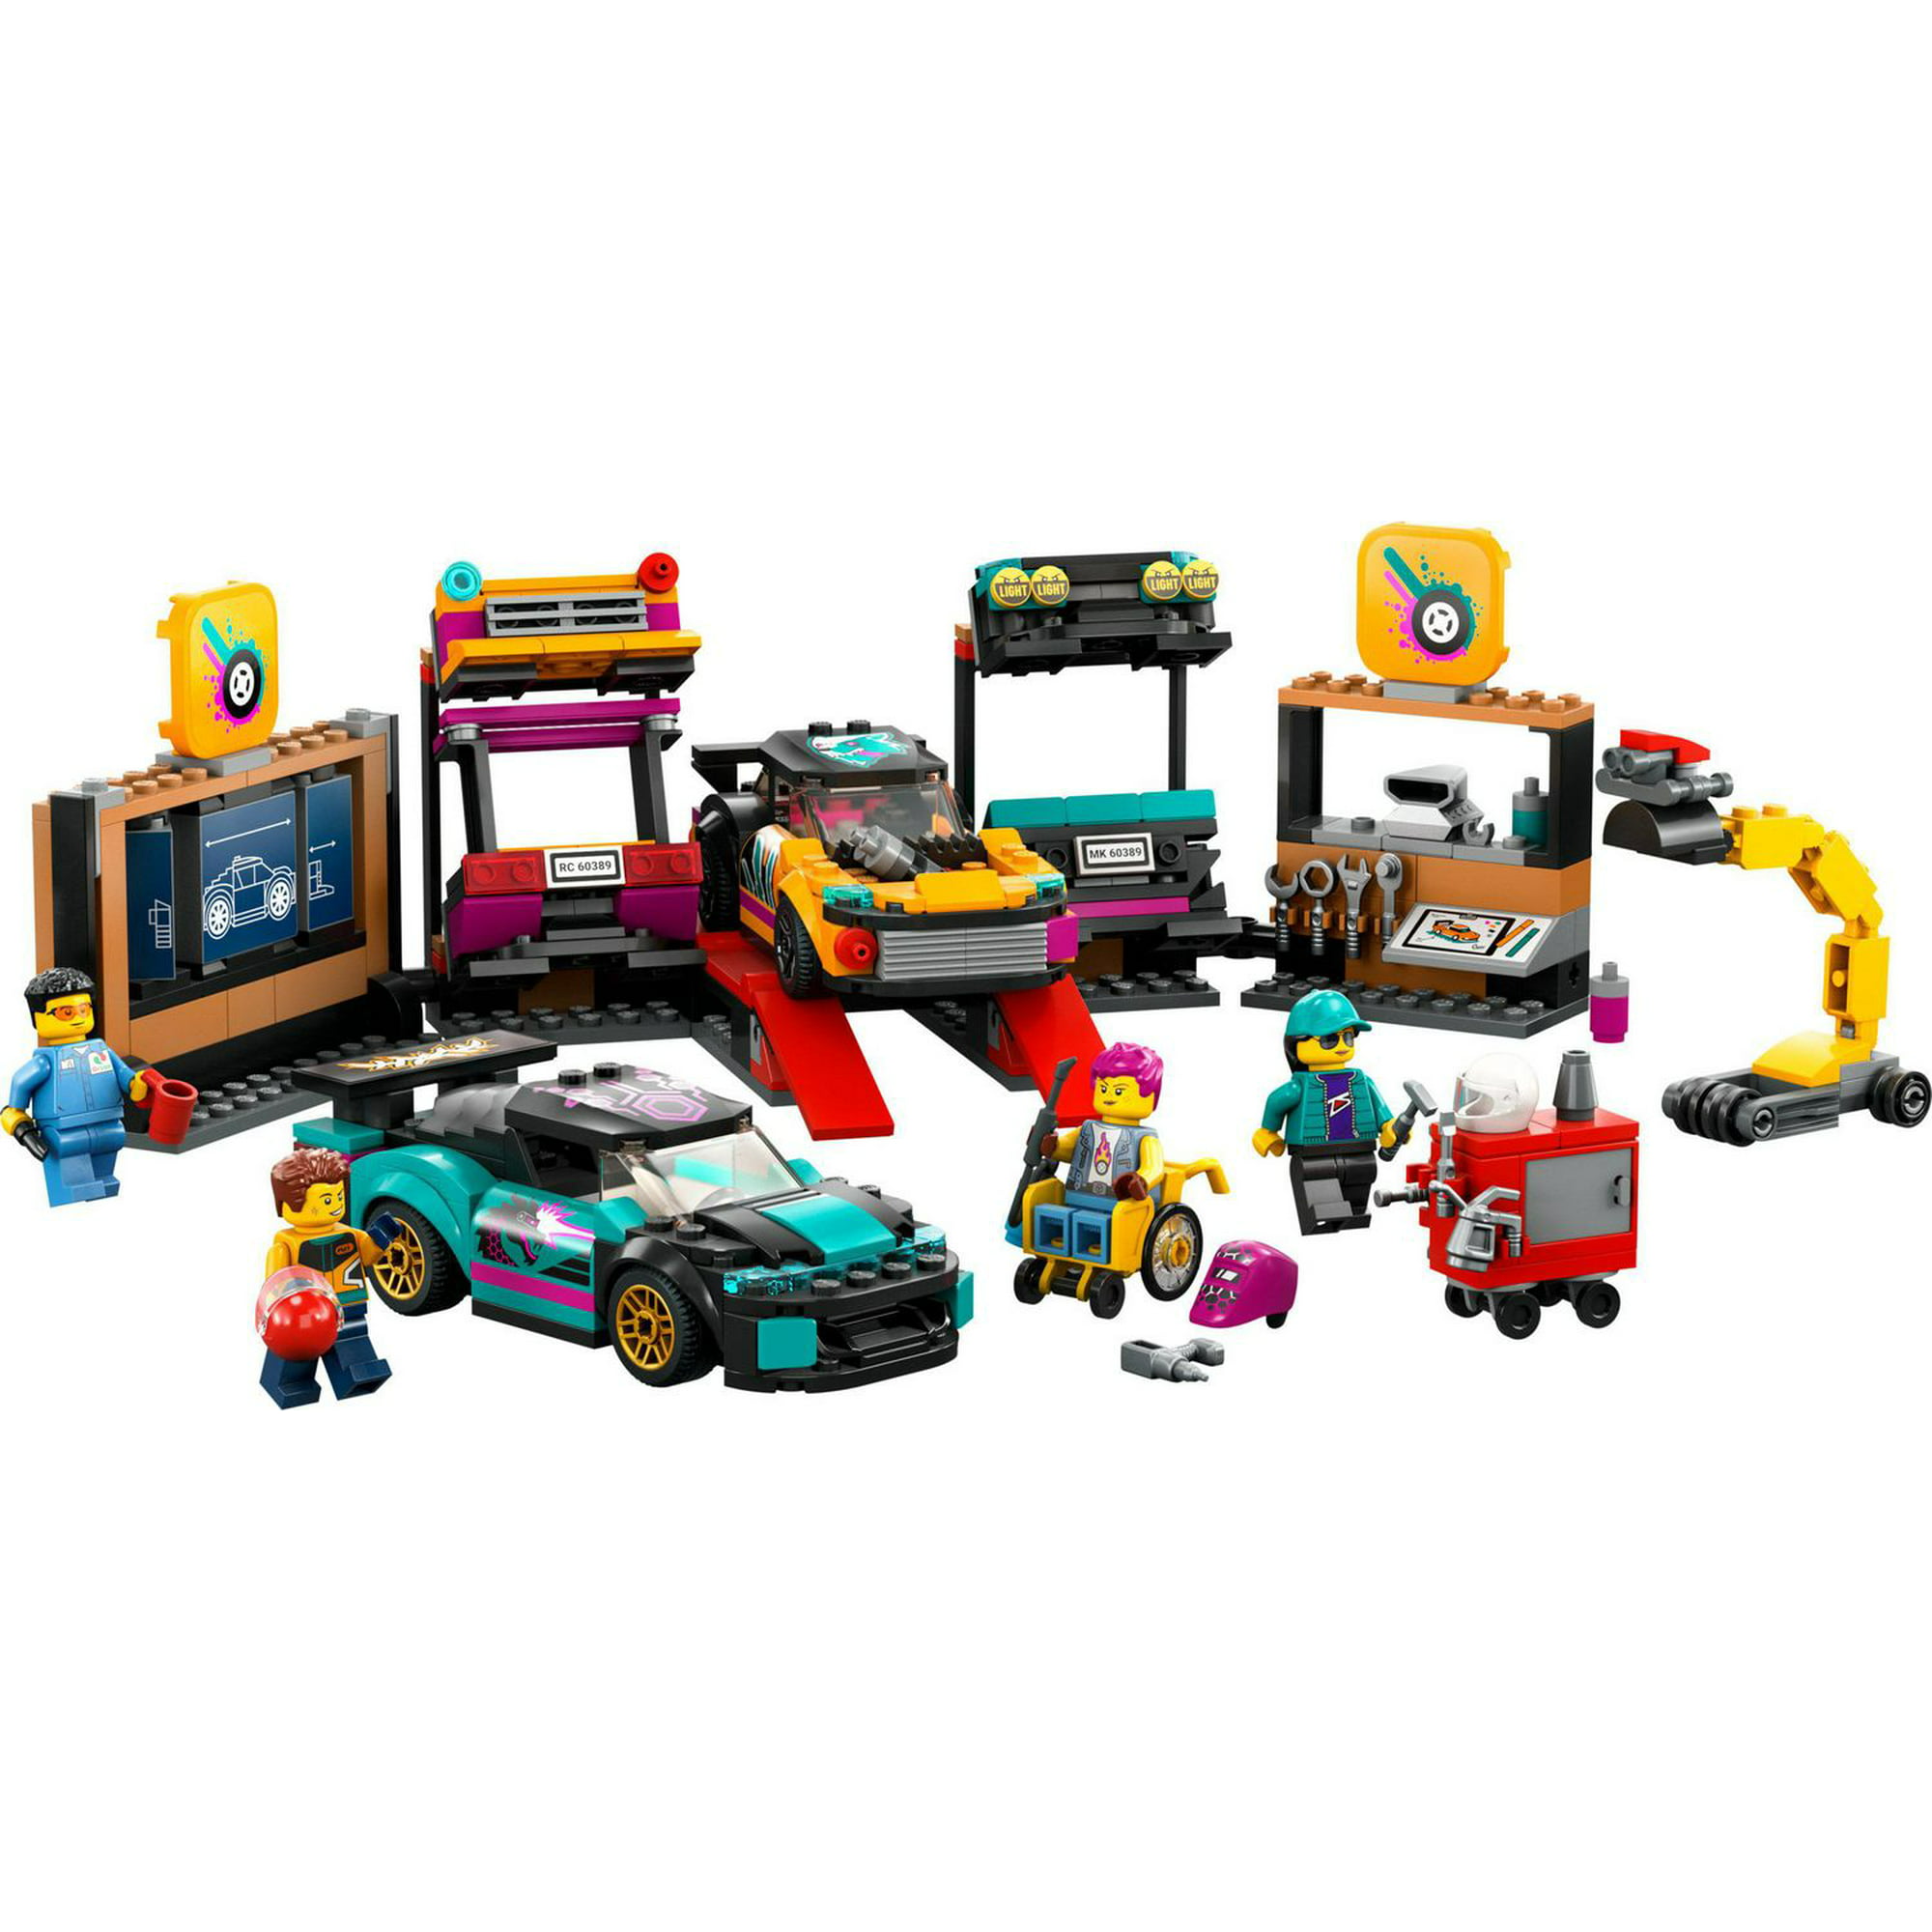 LEGO City Custom Car Garage 60389, Toy Garage Building Set with 2  Cutomizable Cars, Pretend Play Mechanic Toy with 4 Mini Figures, Birthday  Gift Idea for Boys, Girls, Kids Who Love Cars